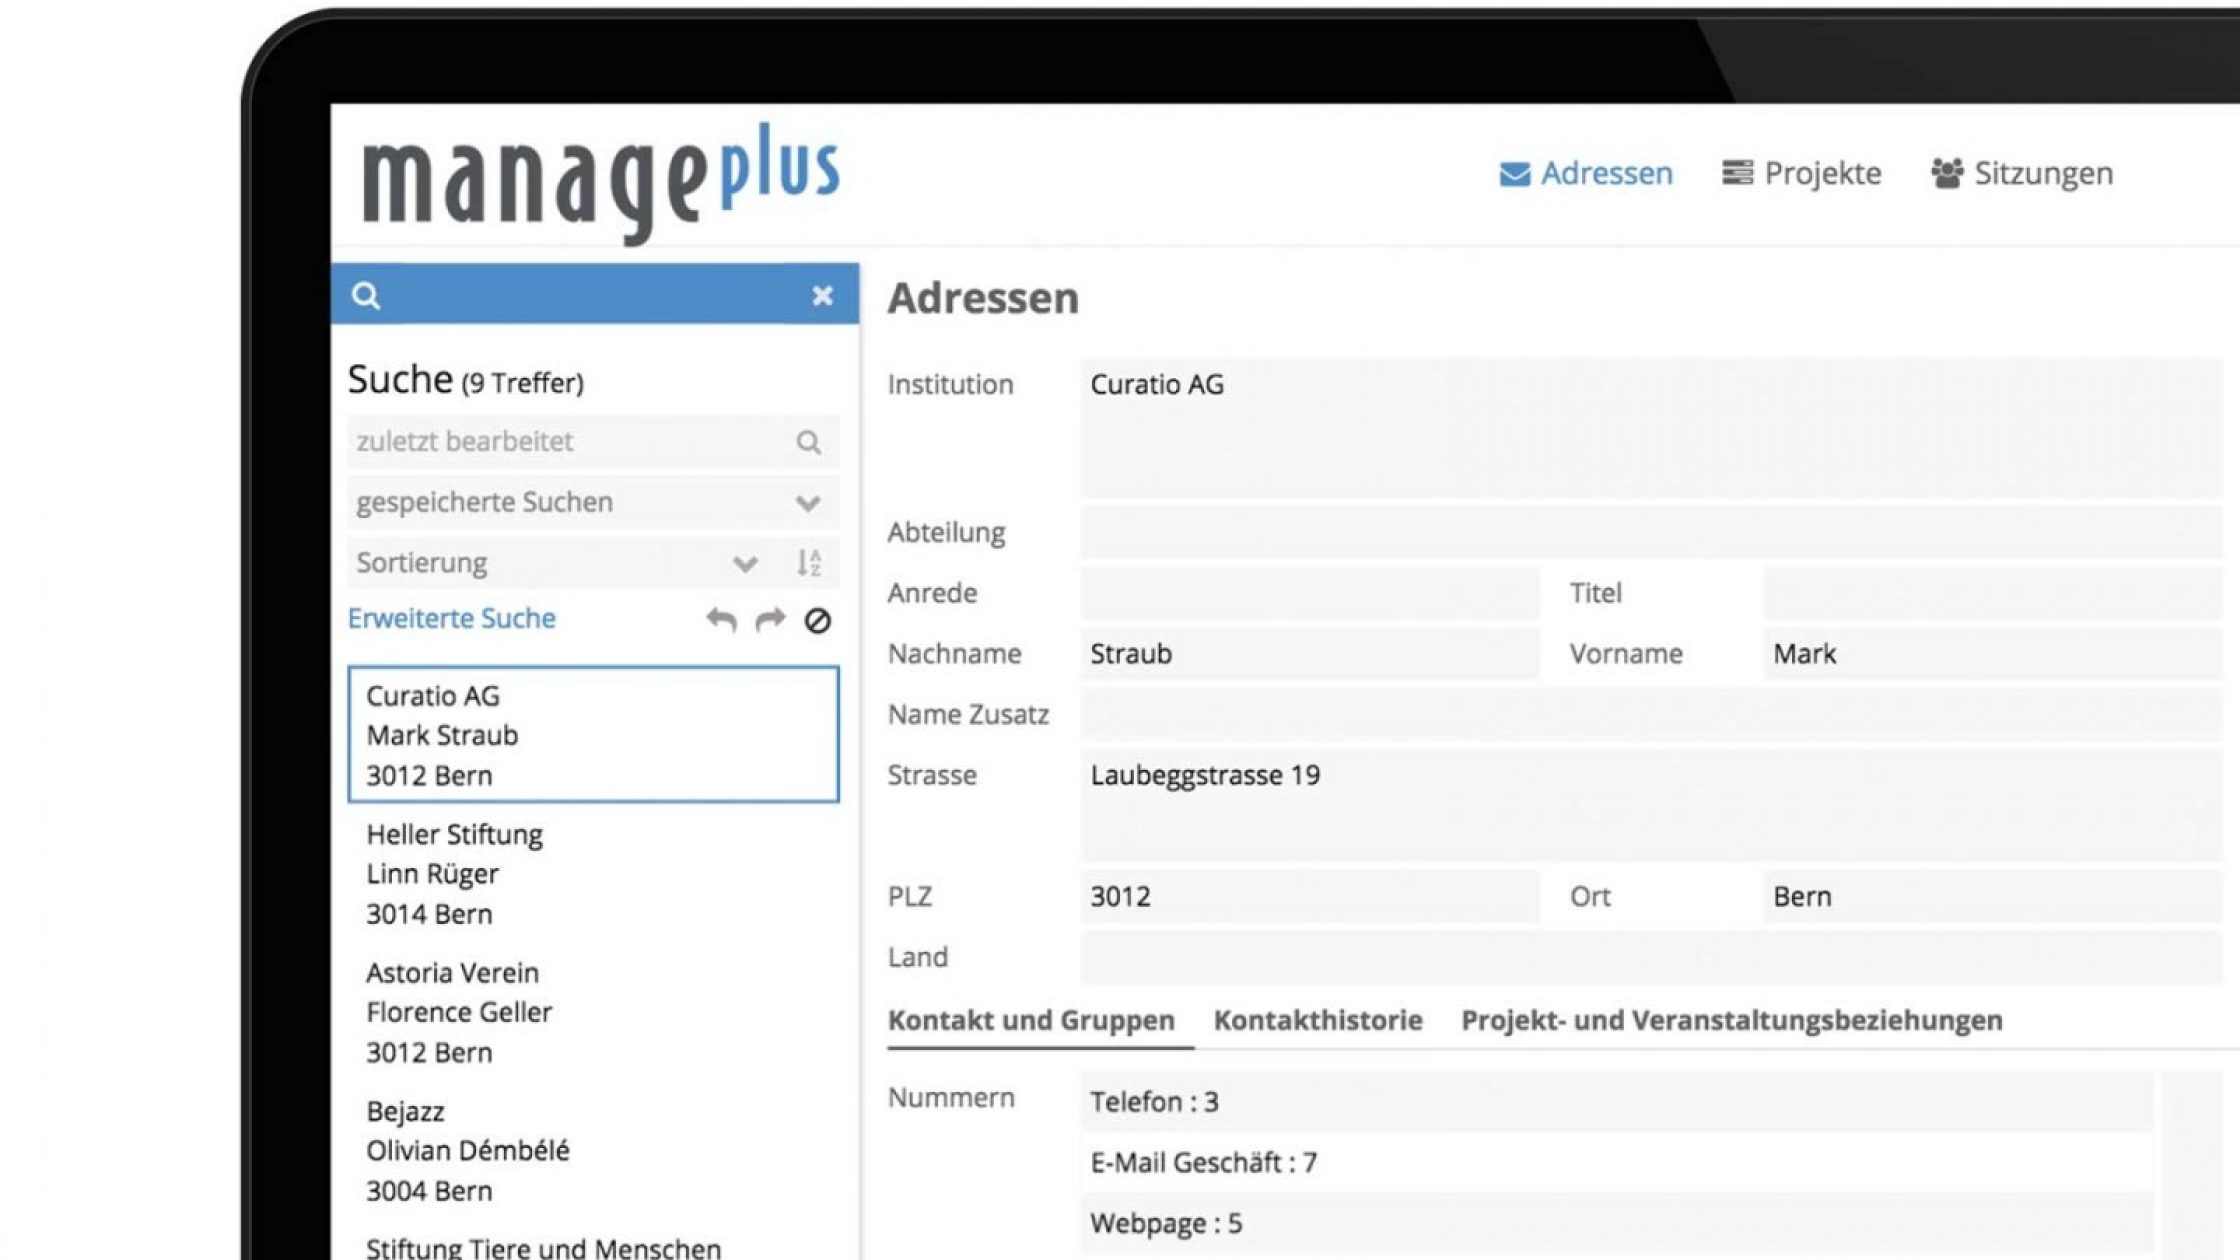 manageplus-Interface-moderne-et-intuitive